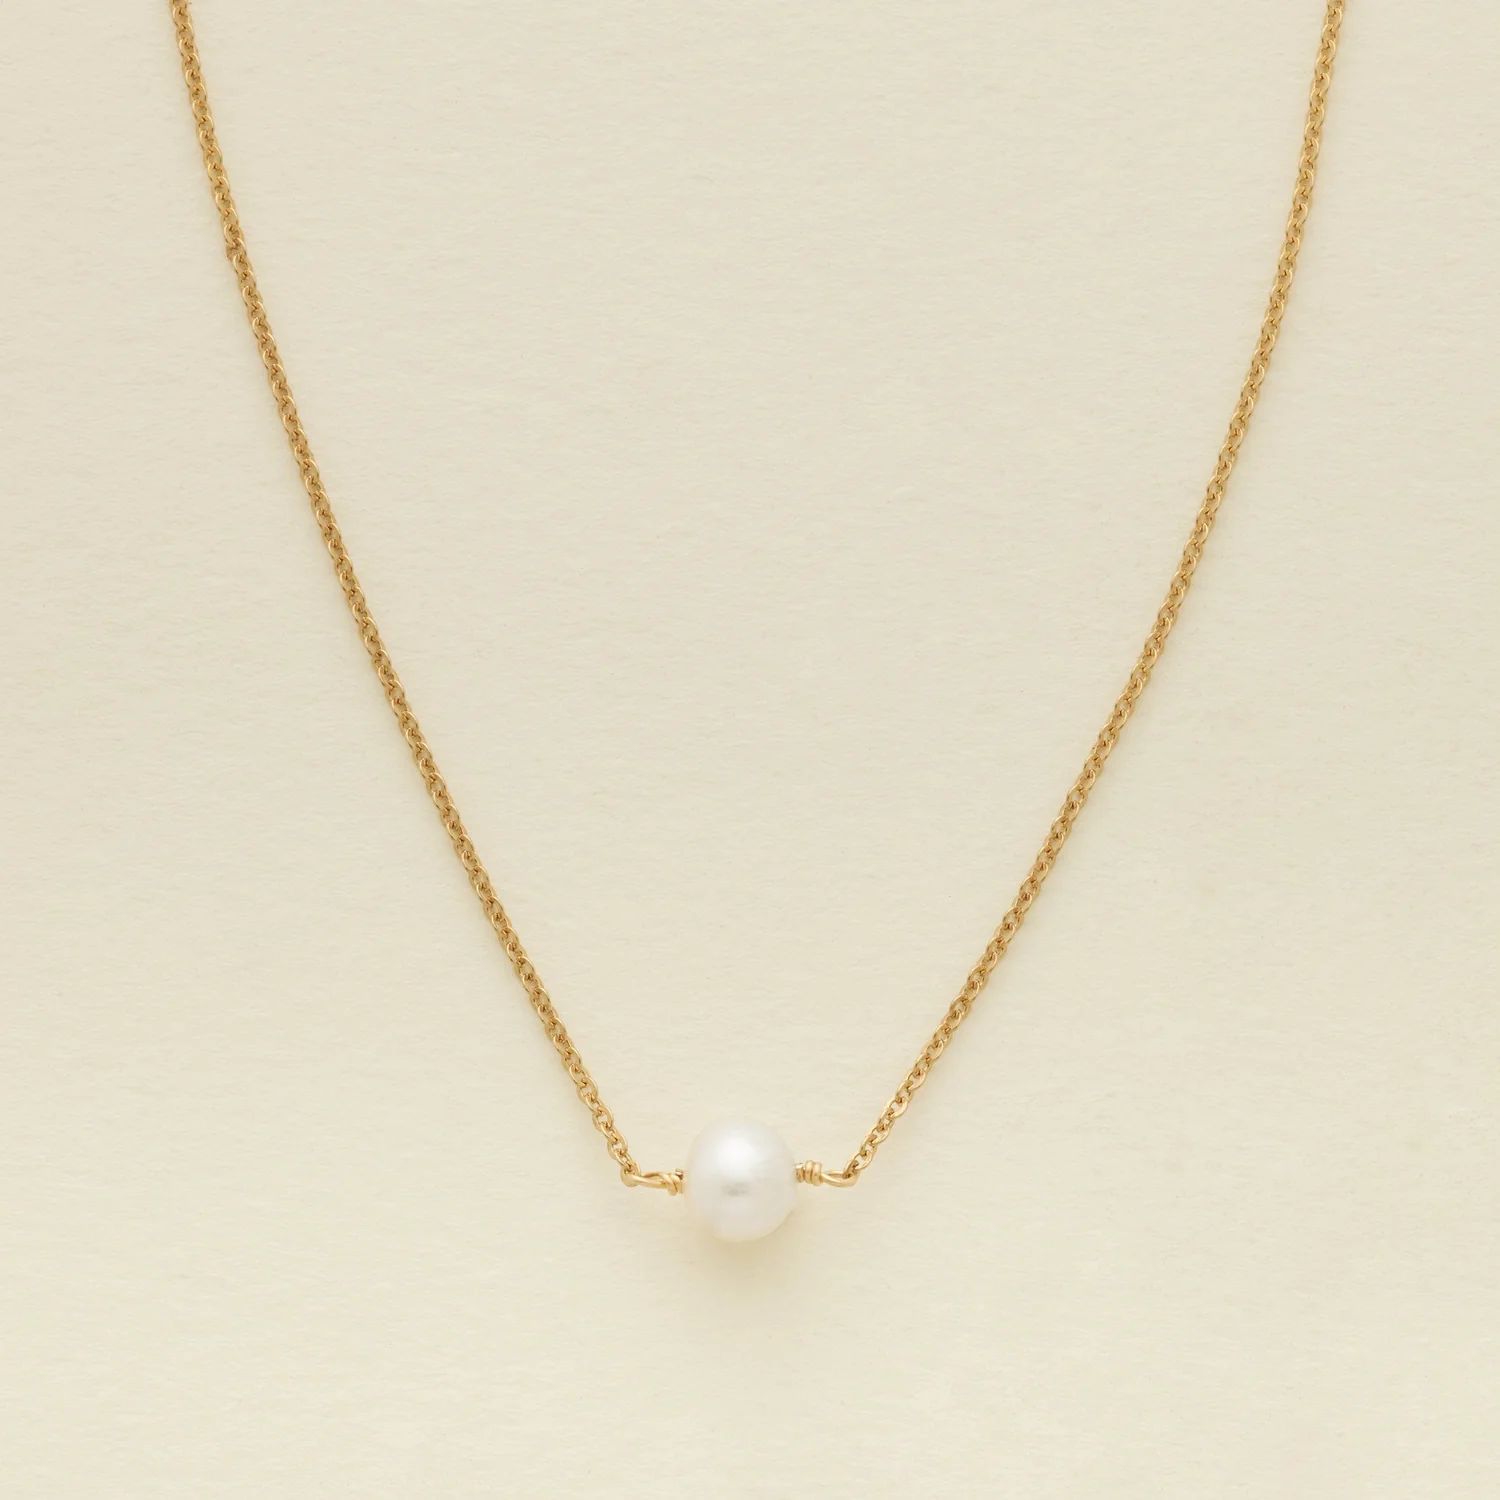 Made By Mary Pearl Choker Necklace | Simple, 14k Gold Filled, Delicate | Made by Mary (US)